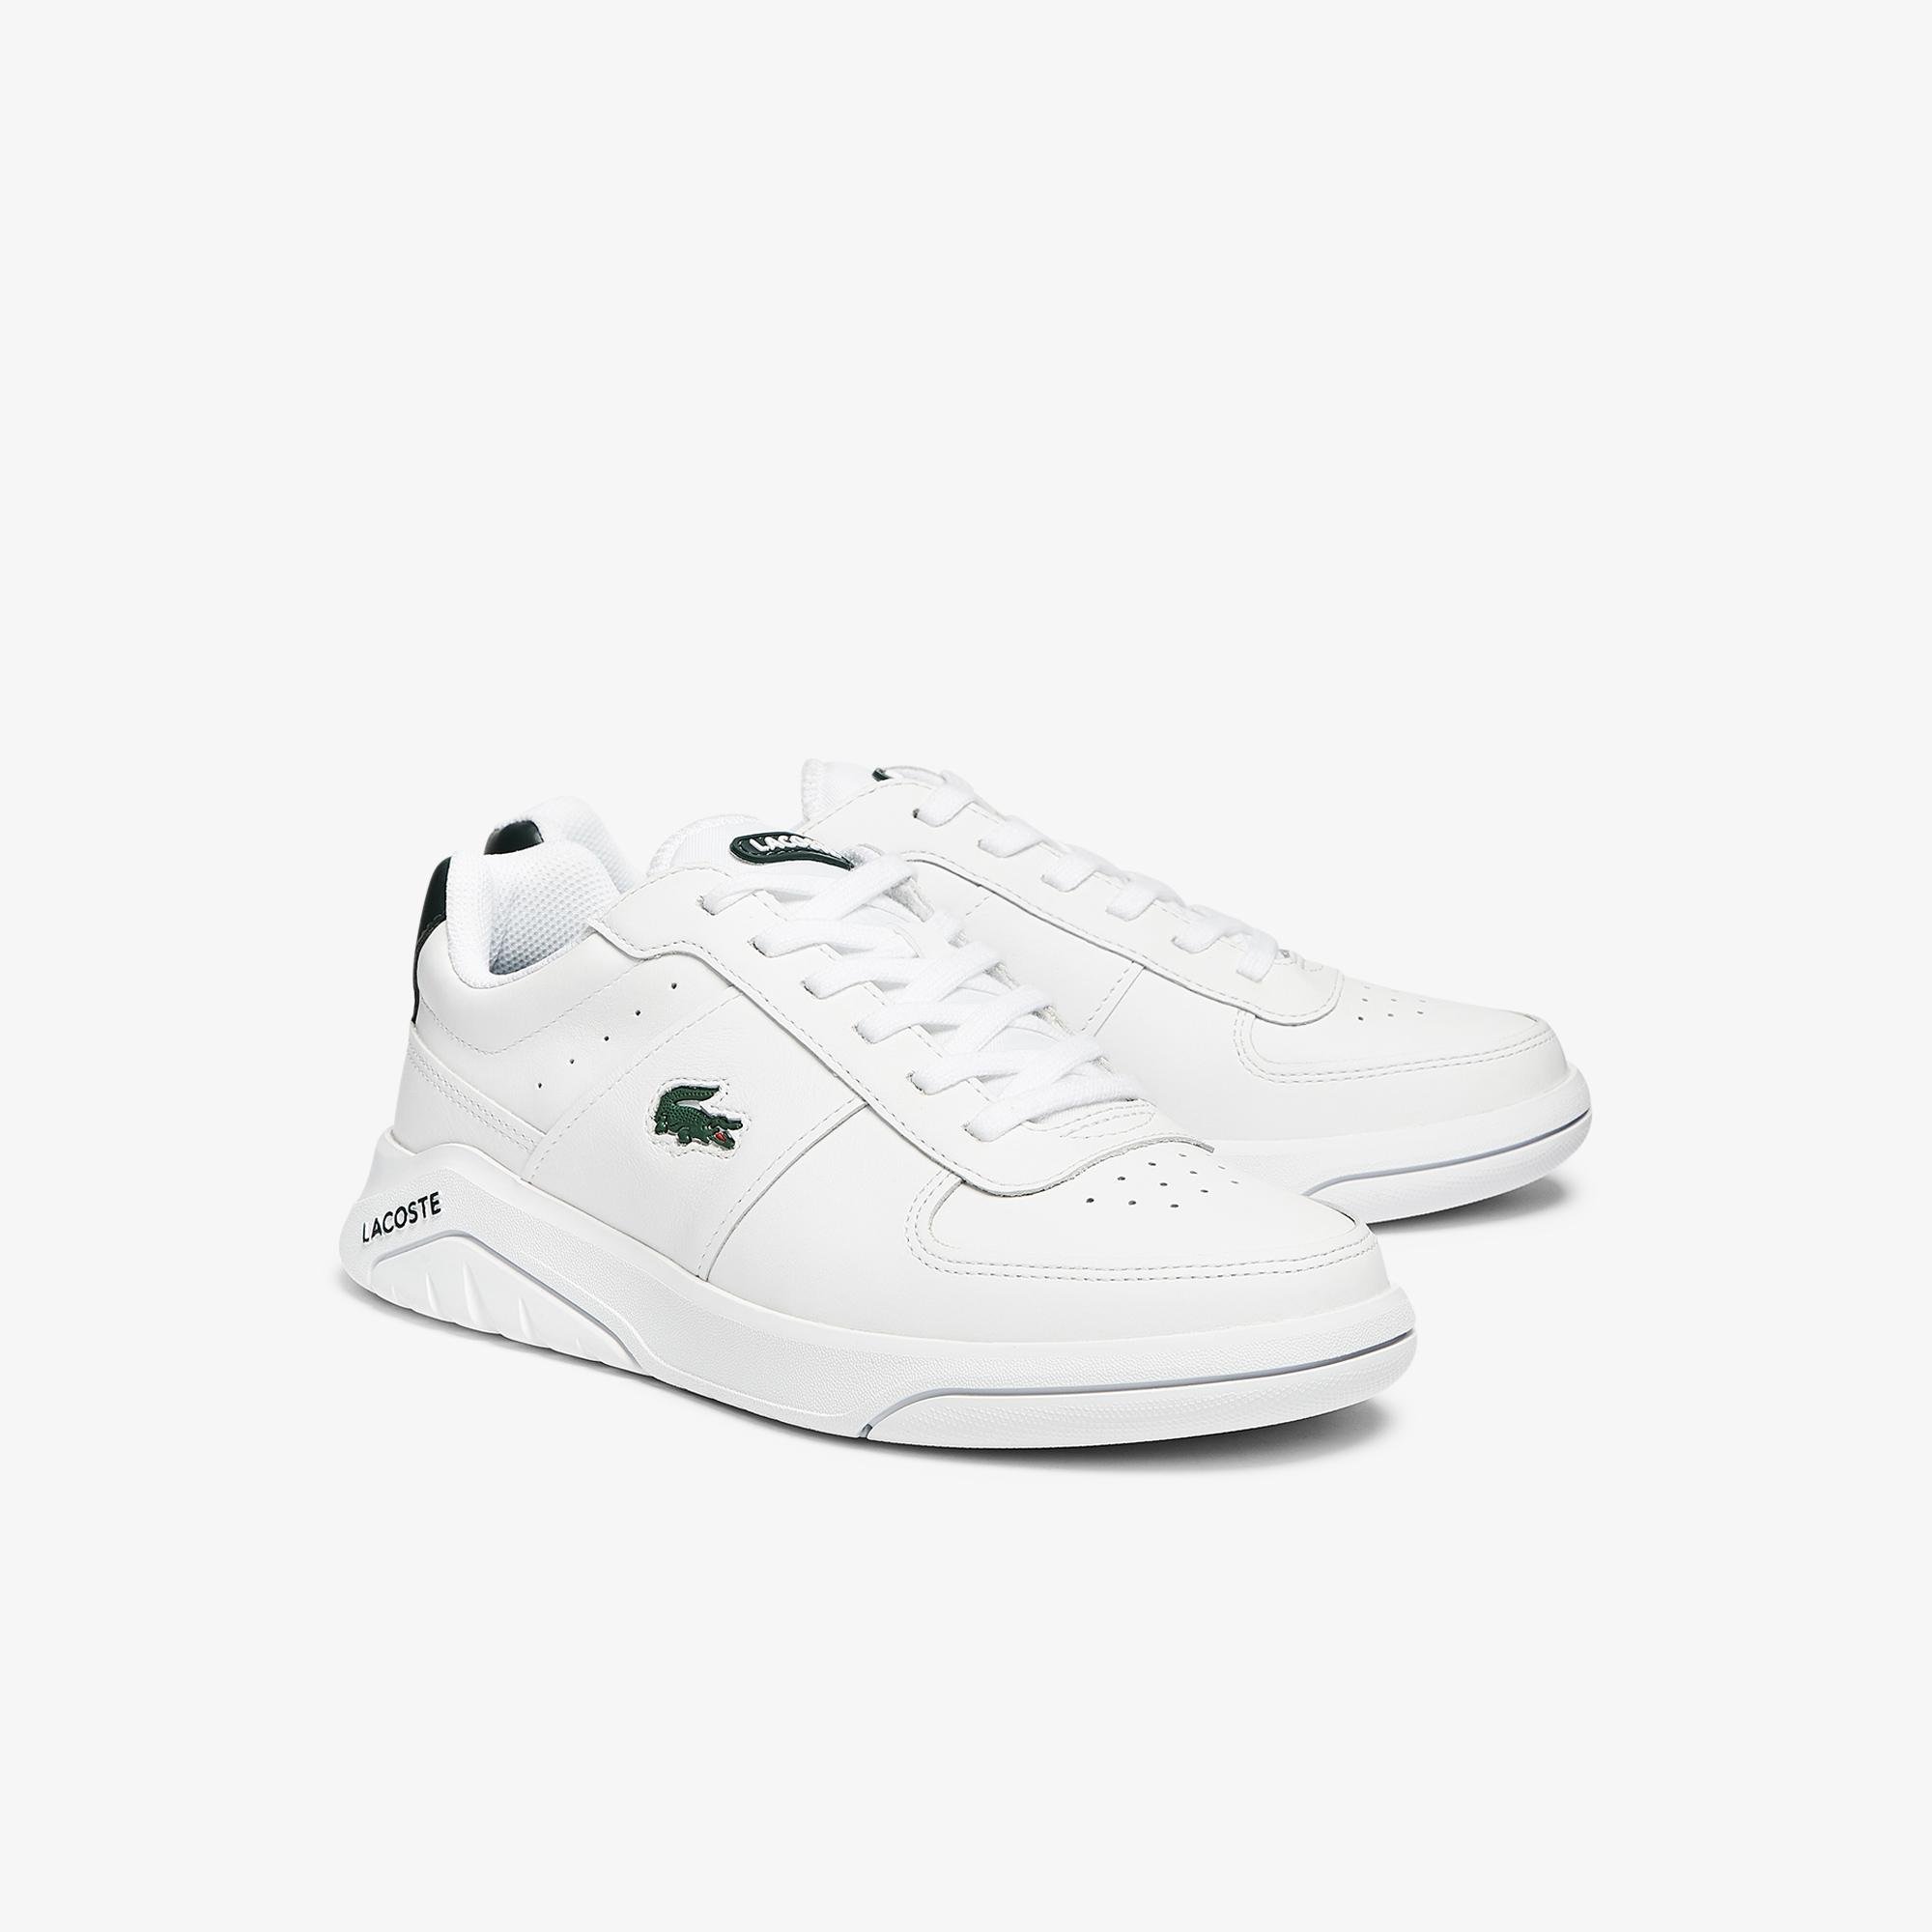 Lacoste Men's Game Advance Leather Trainers